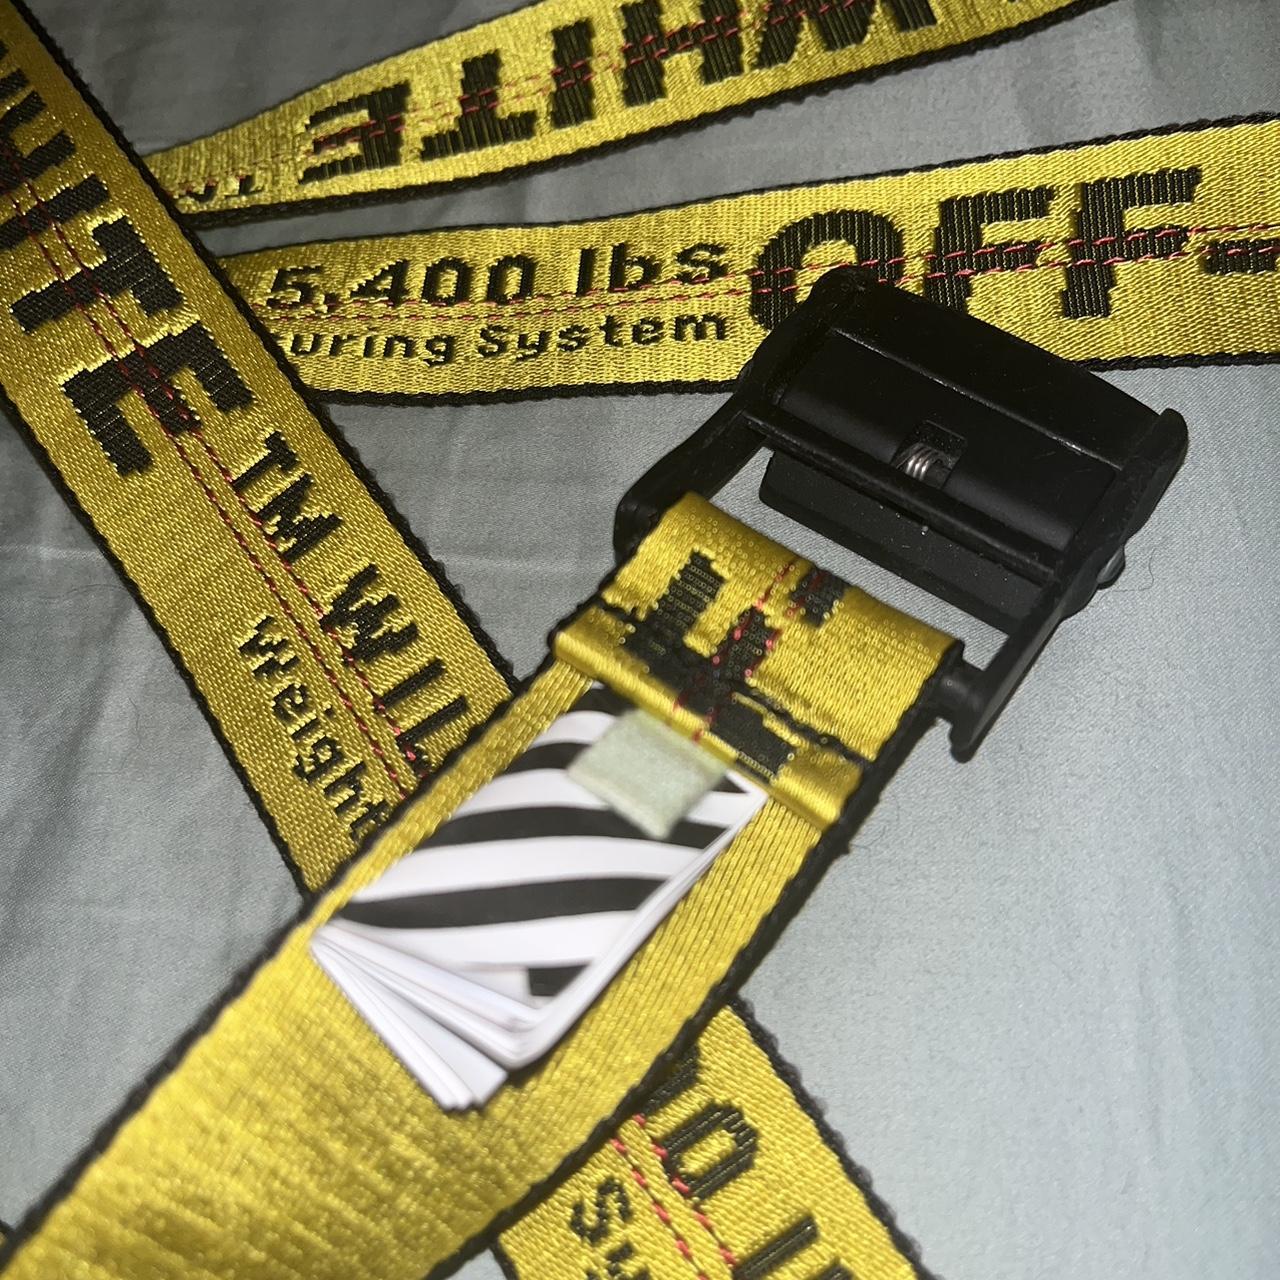 OFF-WHITE belt 🤍 never been used #offwhite #OFF-WHITE - Depop